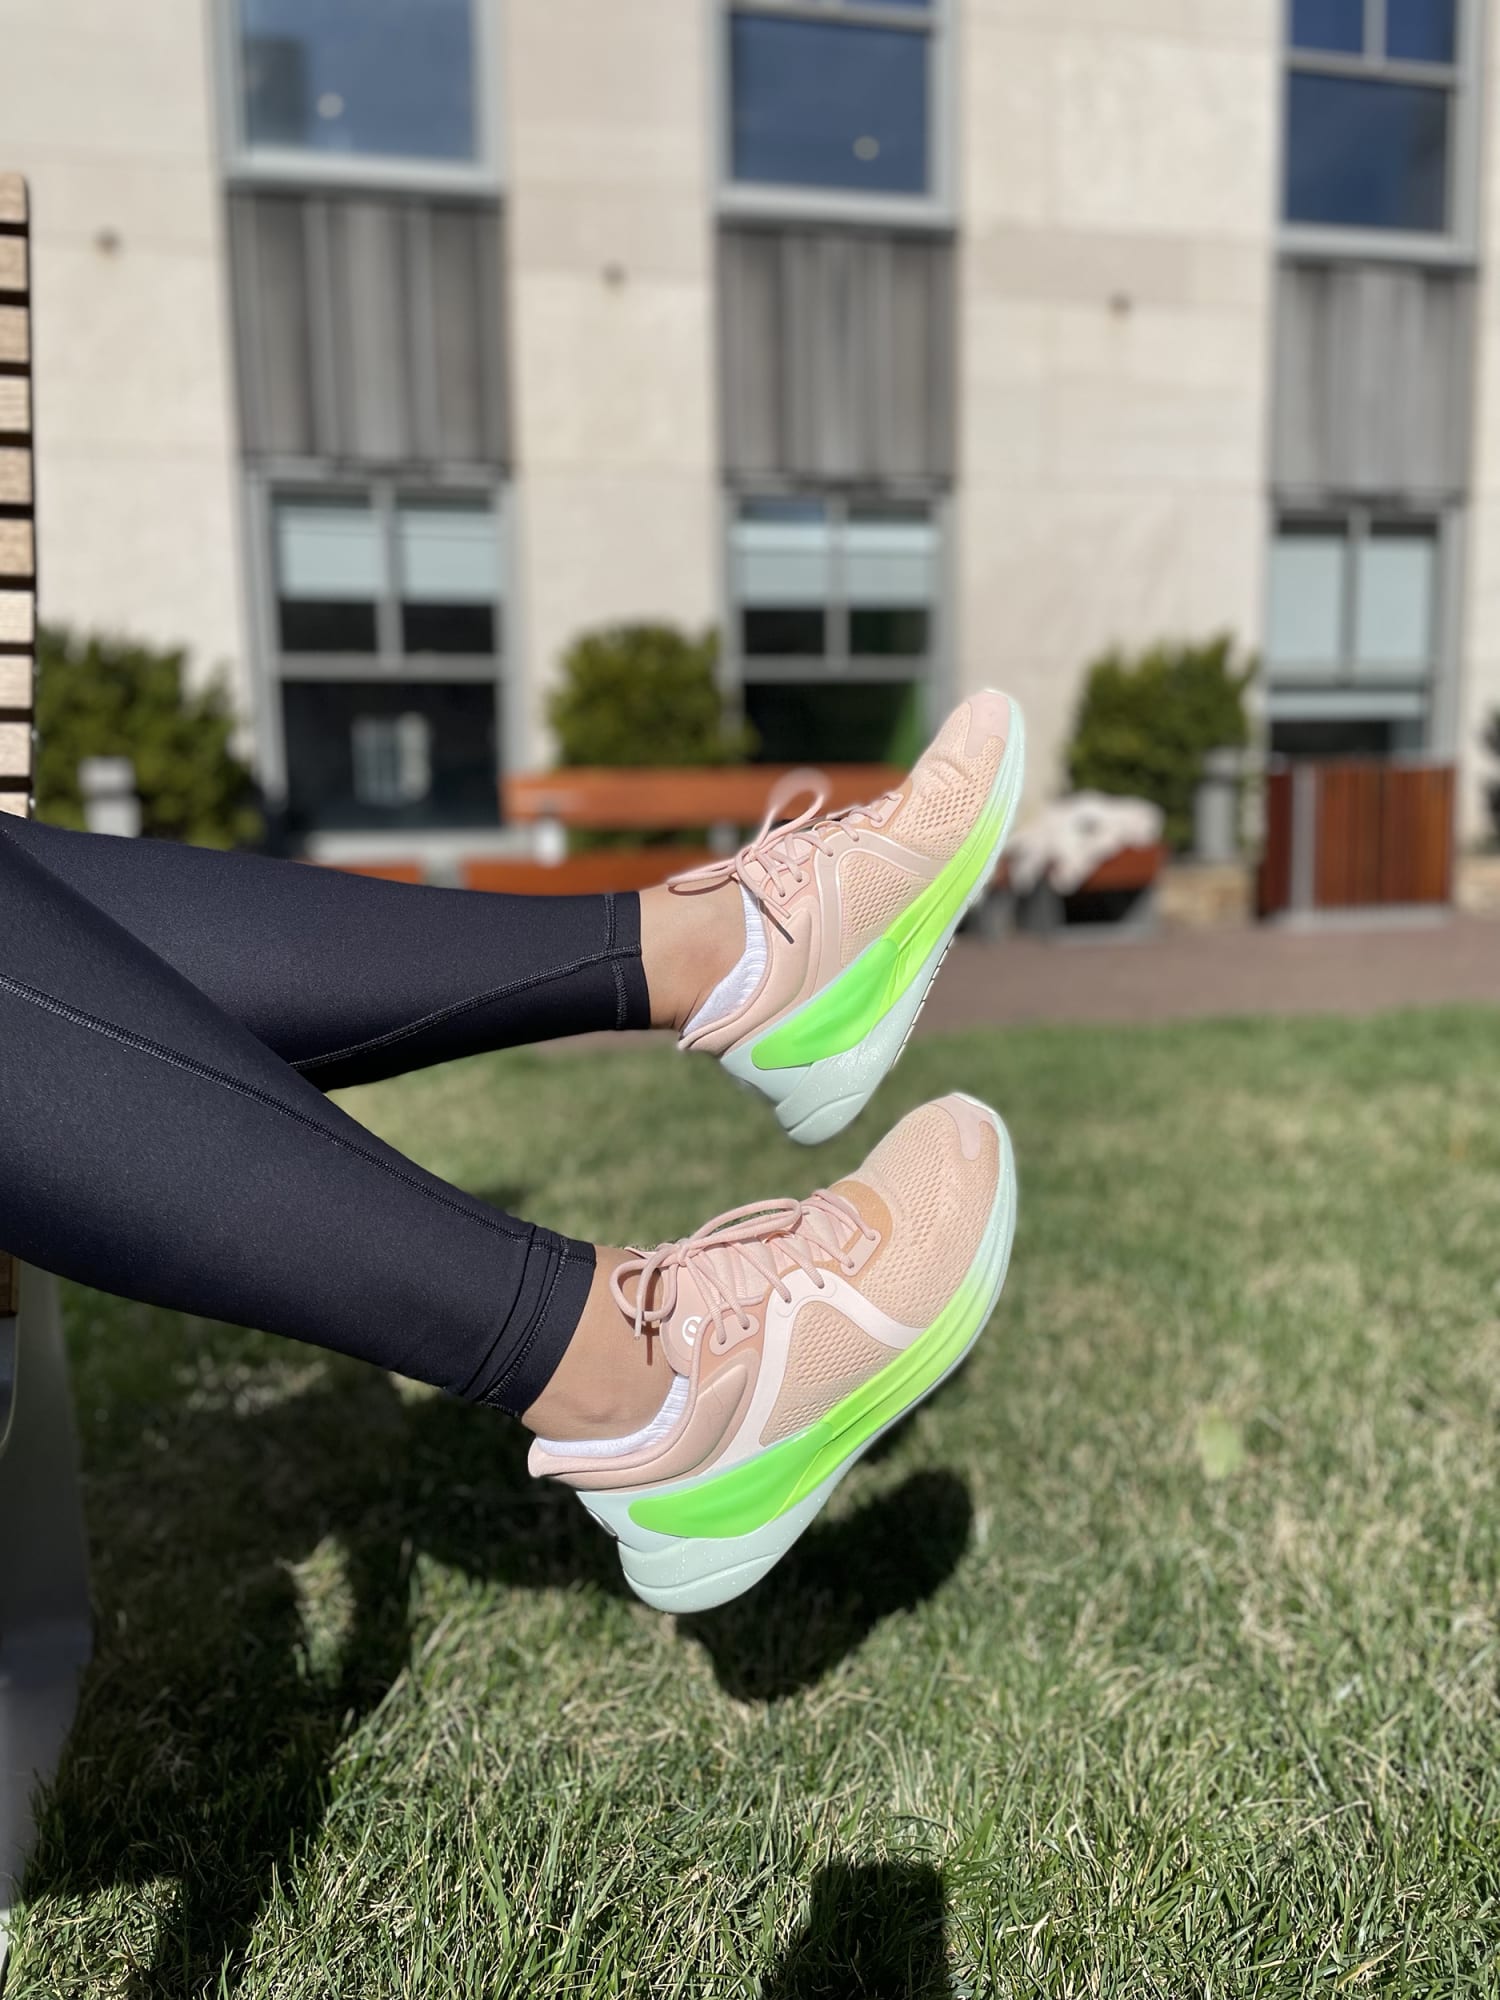 The New Lululemon Women's Shoes Are Available Now – Chron Shopping